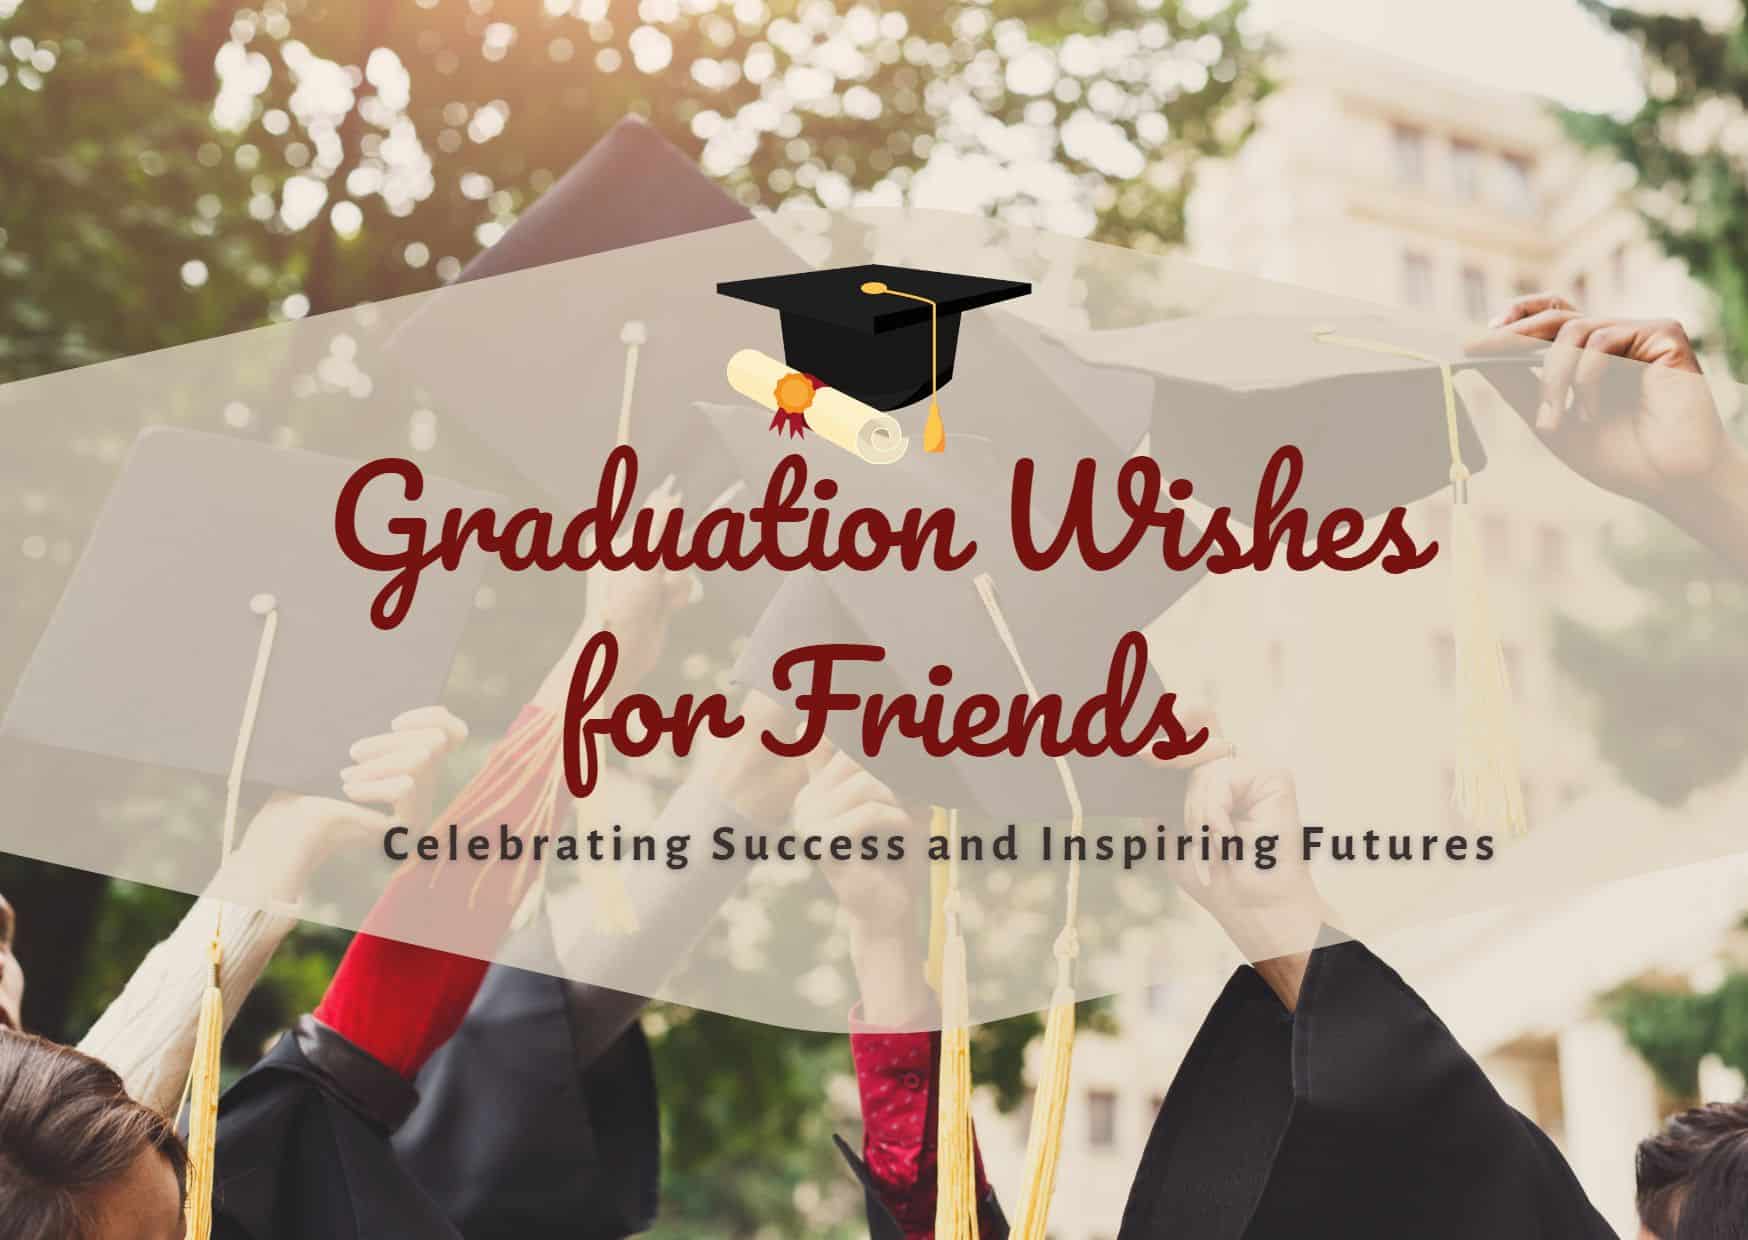 Effective Graduation Wishes For Friends -Celebrating Success And Inspiring Futures